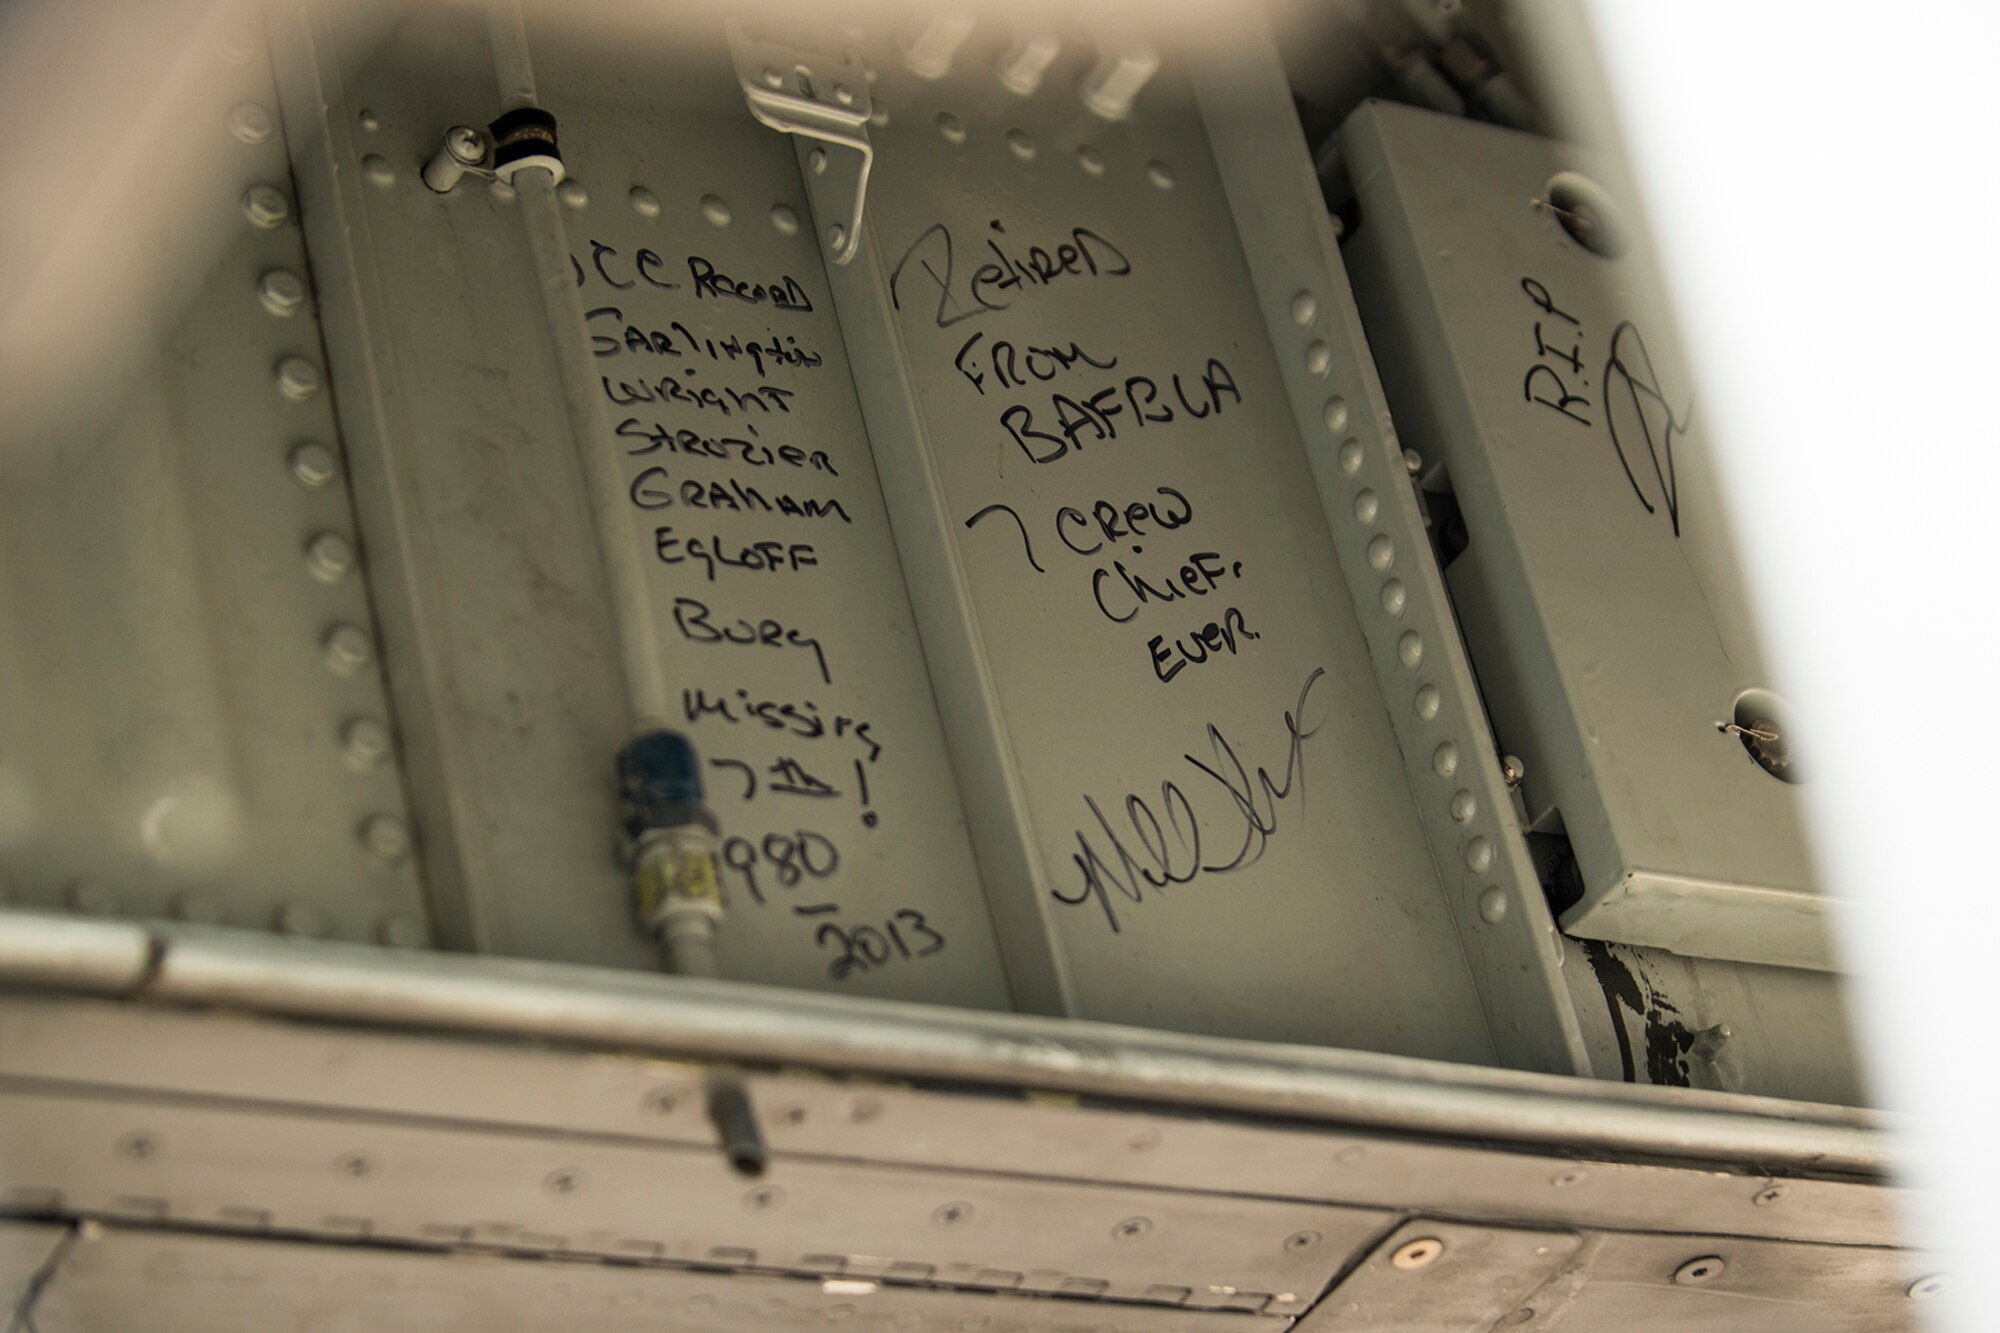 Names of past crew chiefs are written in the wheel well of a 917th Fighter Group A-10 Thunderbolt II prior to it leaving Barksdale Air Force Base, La., for Davis-Monthan AFB, Ariz., April 8, 2013. The aircraft will be retired from active service and is among the first three A-10s selected to leave Barksdale in preparation for the inactivation of the FG. (U.S. Air Force photo by Master Sgt. Greg Steele/Released)